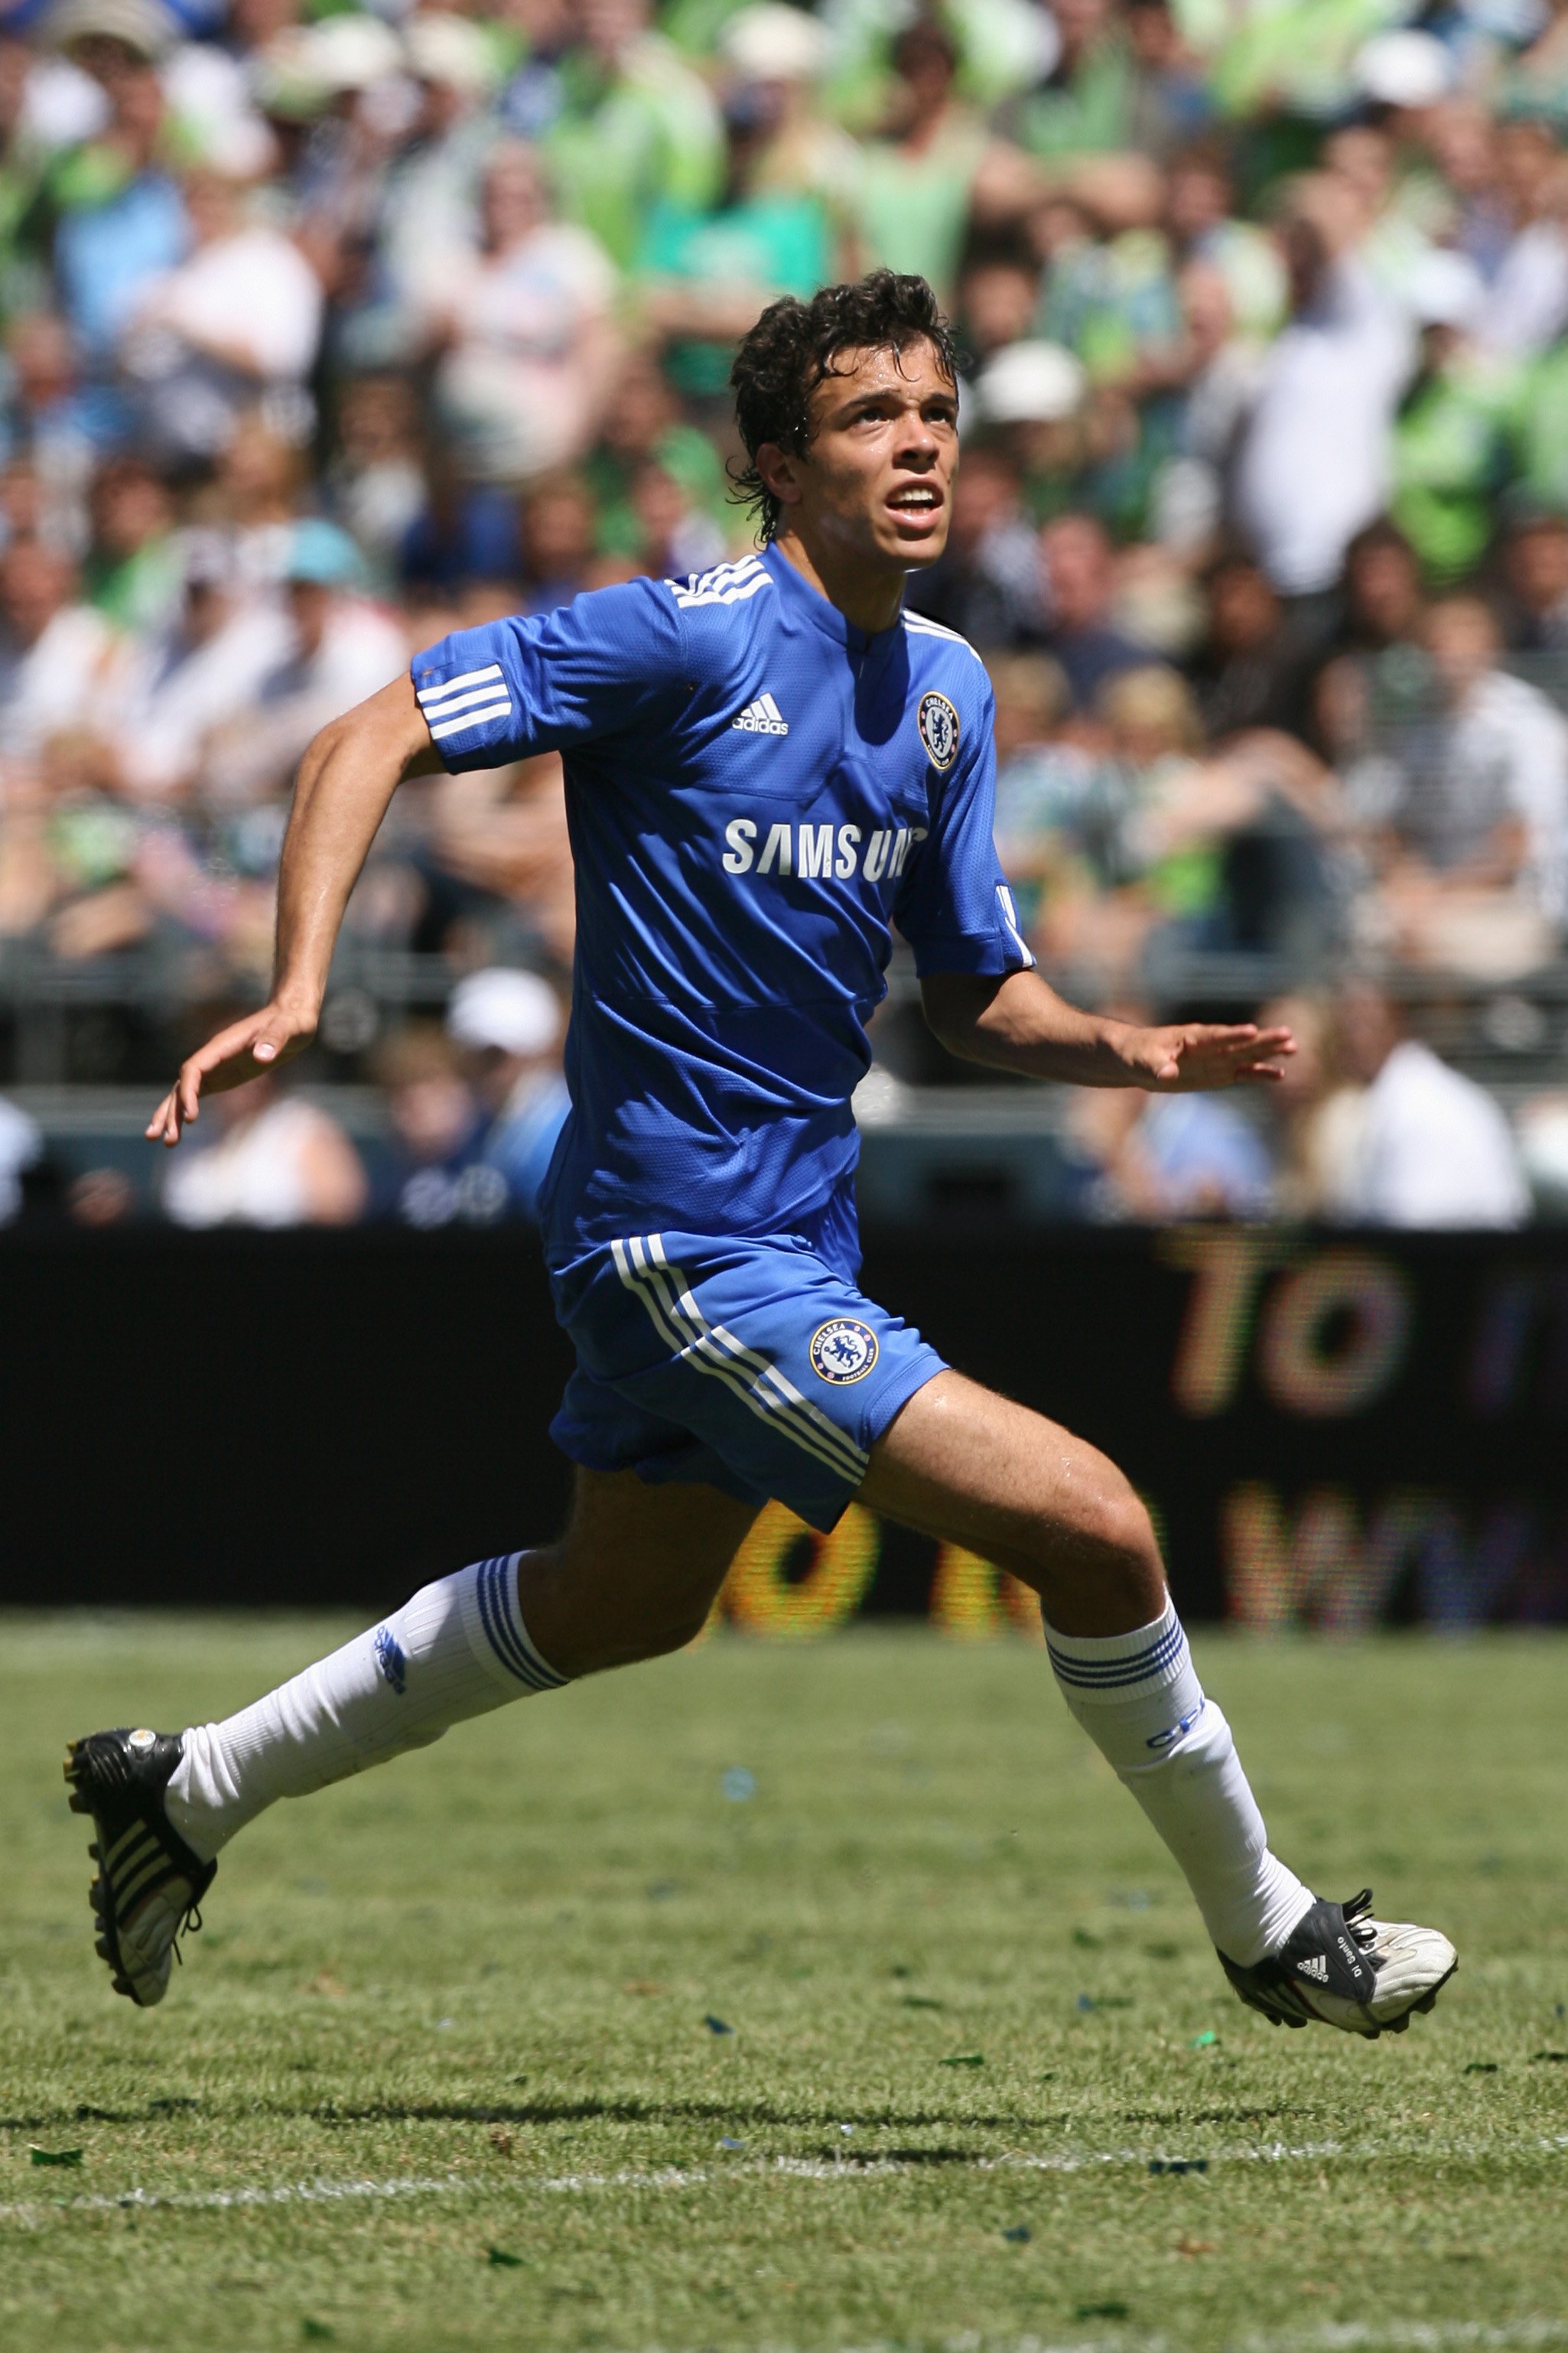 SEATTLE - JULY 18:  Franco Di Santo #9 of Chelsea FC runs during the game against Seattle Sounders FC on July 18, 2009 at Qwest Field in Seattle, Washington. (Photo by Otto Greule Jr/Getty Images)